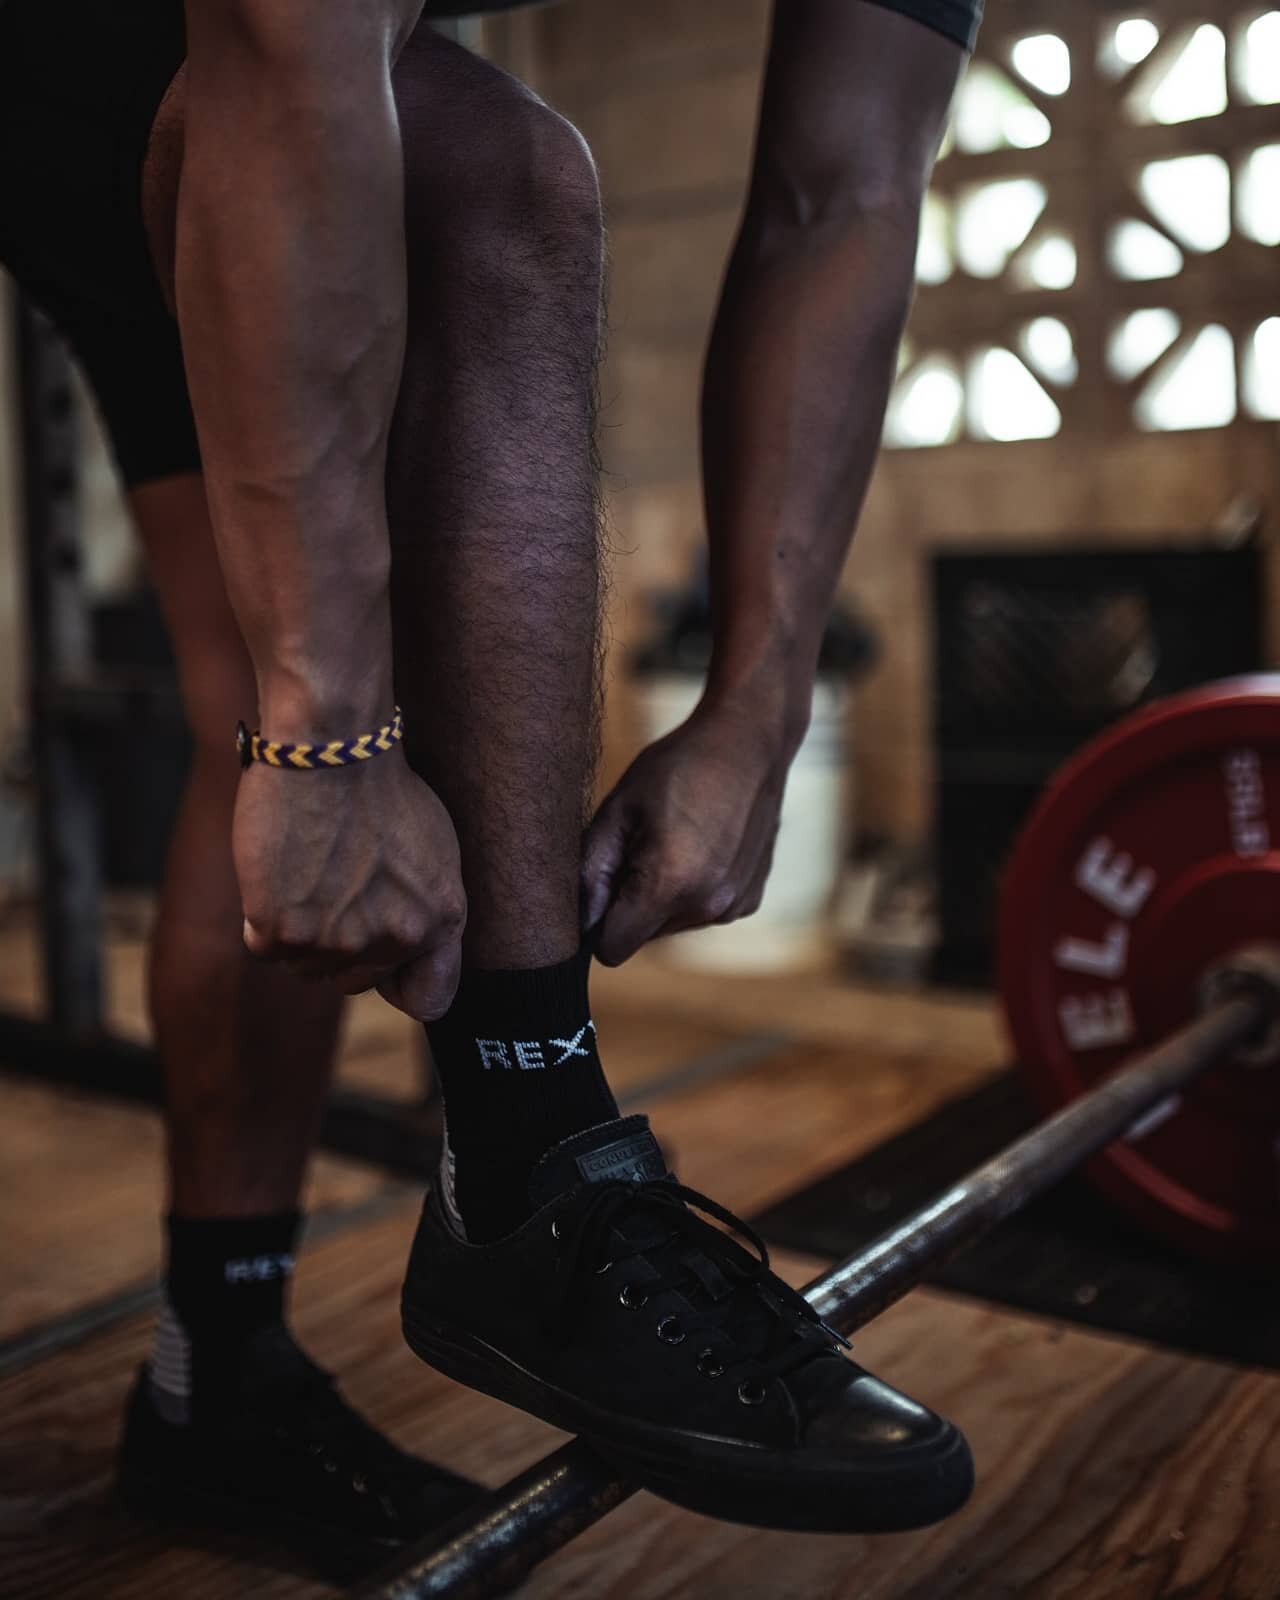 Our socks are great for powerlifting - the arch support pads keep your feet balanced so you have a stronger foundation to lift. Did you check out our sale yet? 🎉 Get 25% off EVERYTHING while it lasts!!